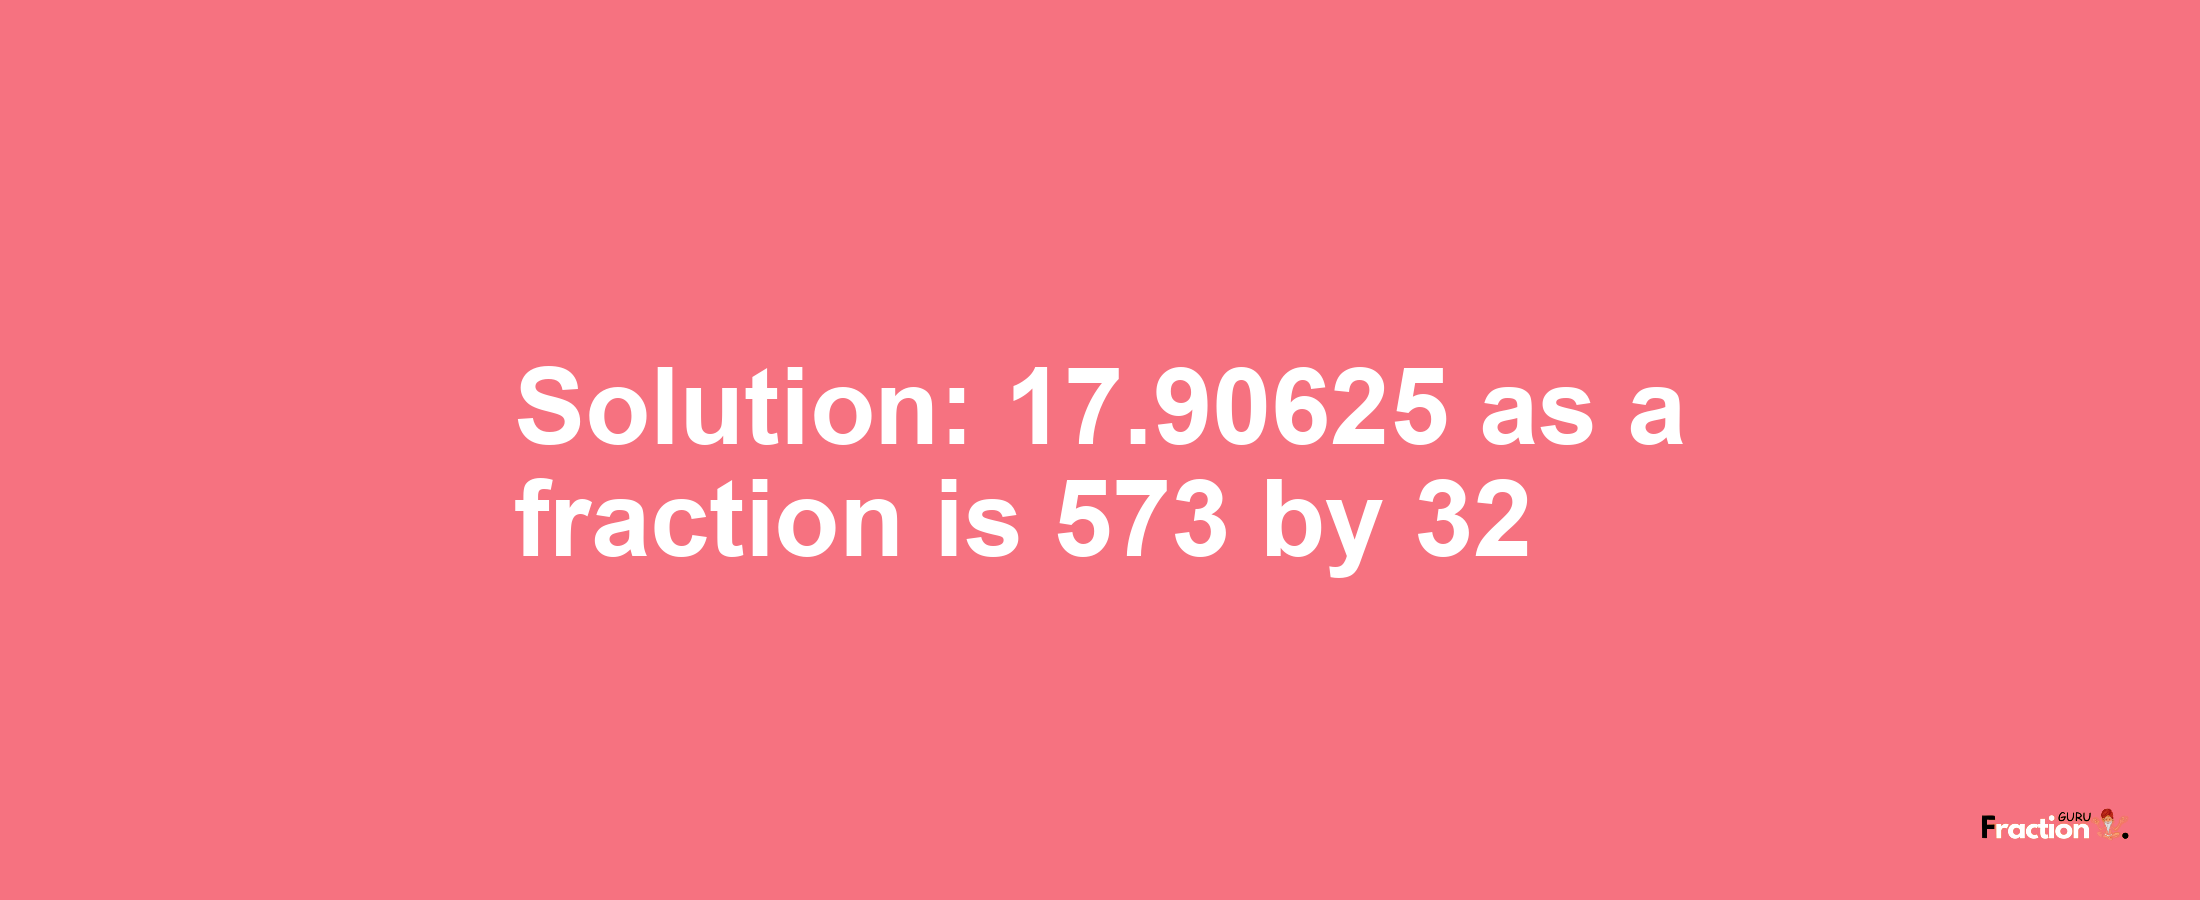 Solution:17.90625 as a fraction is 573/32